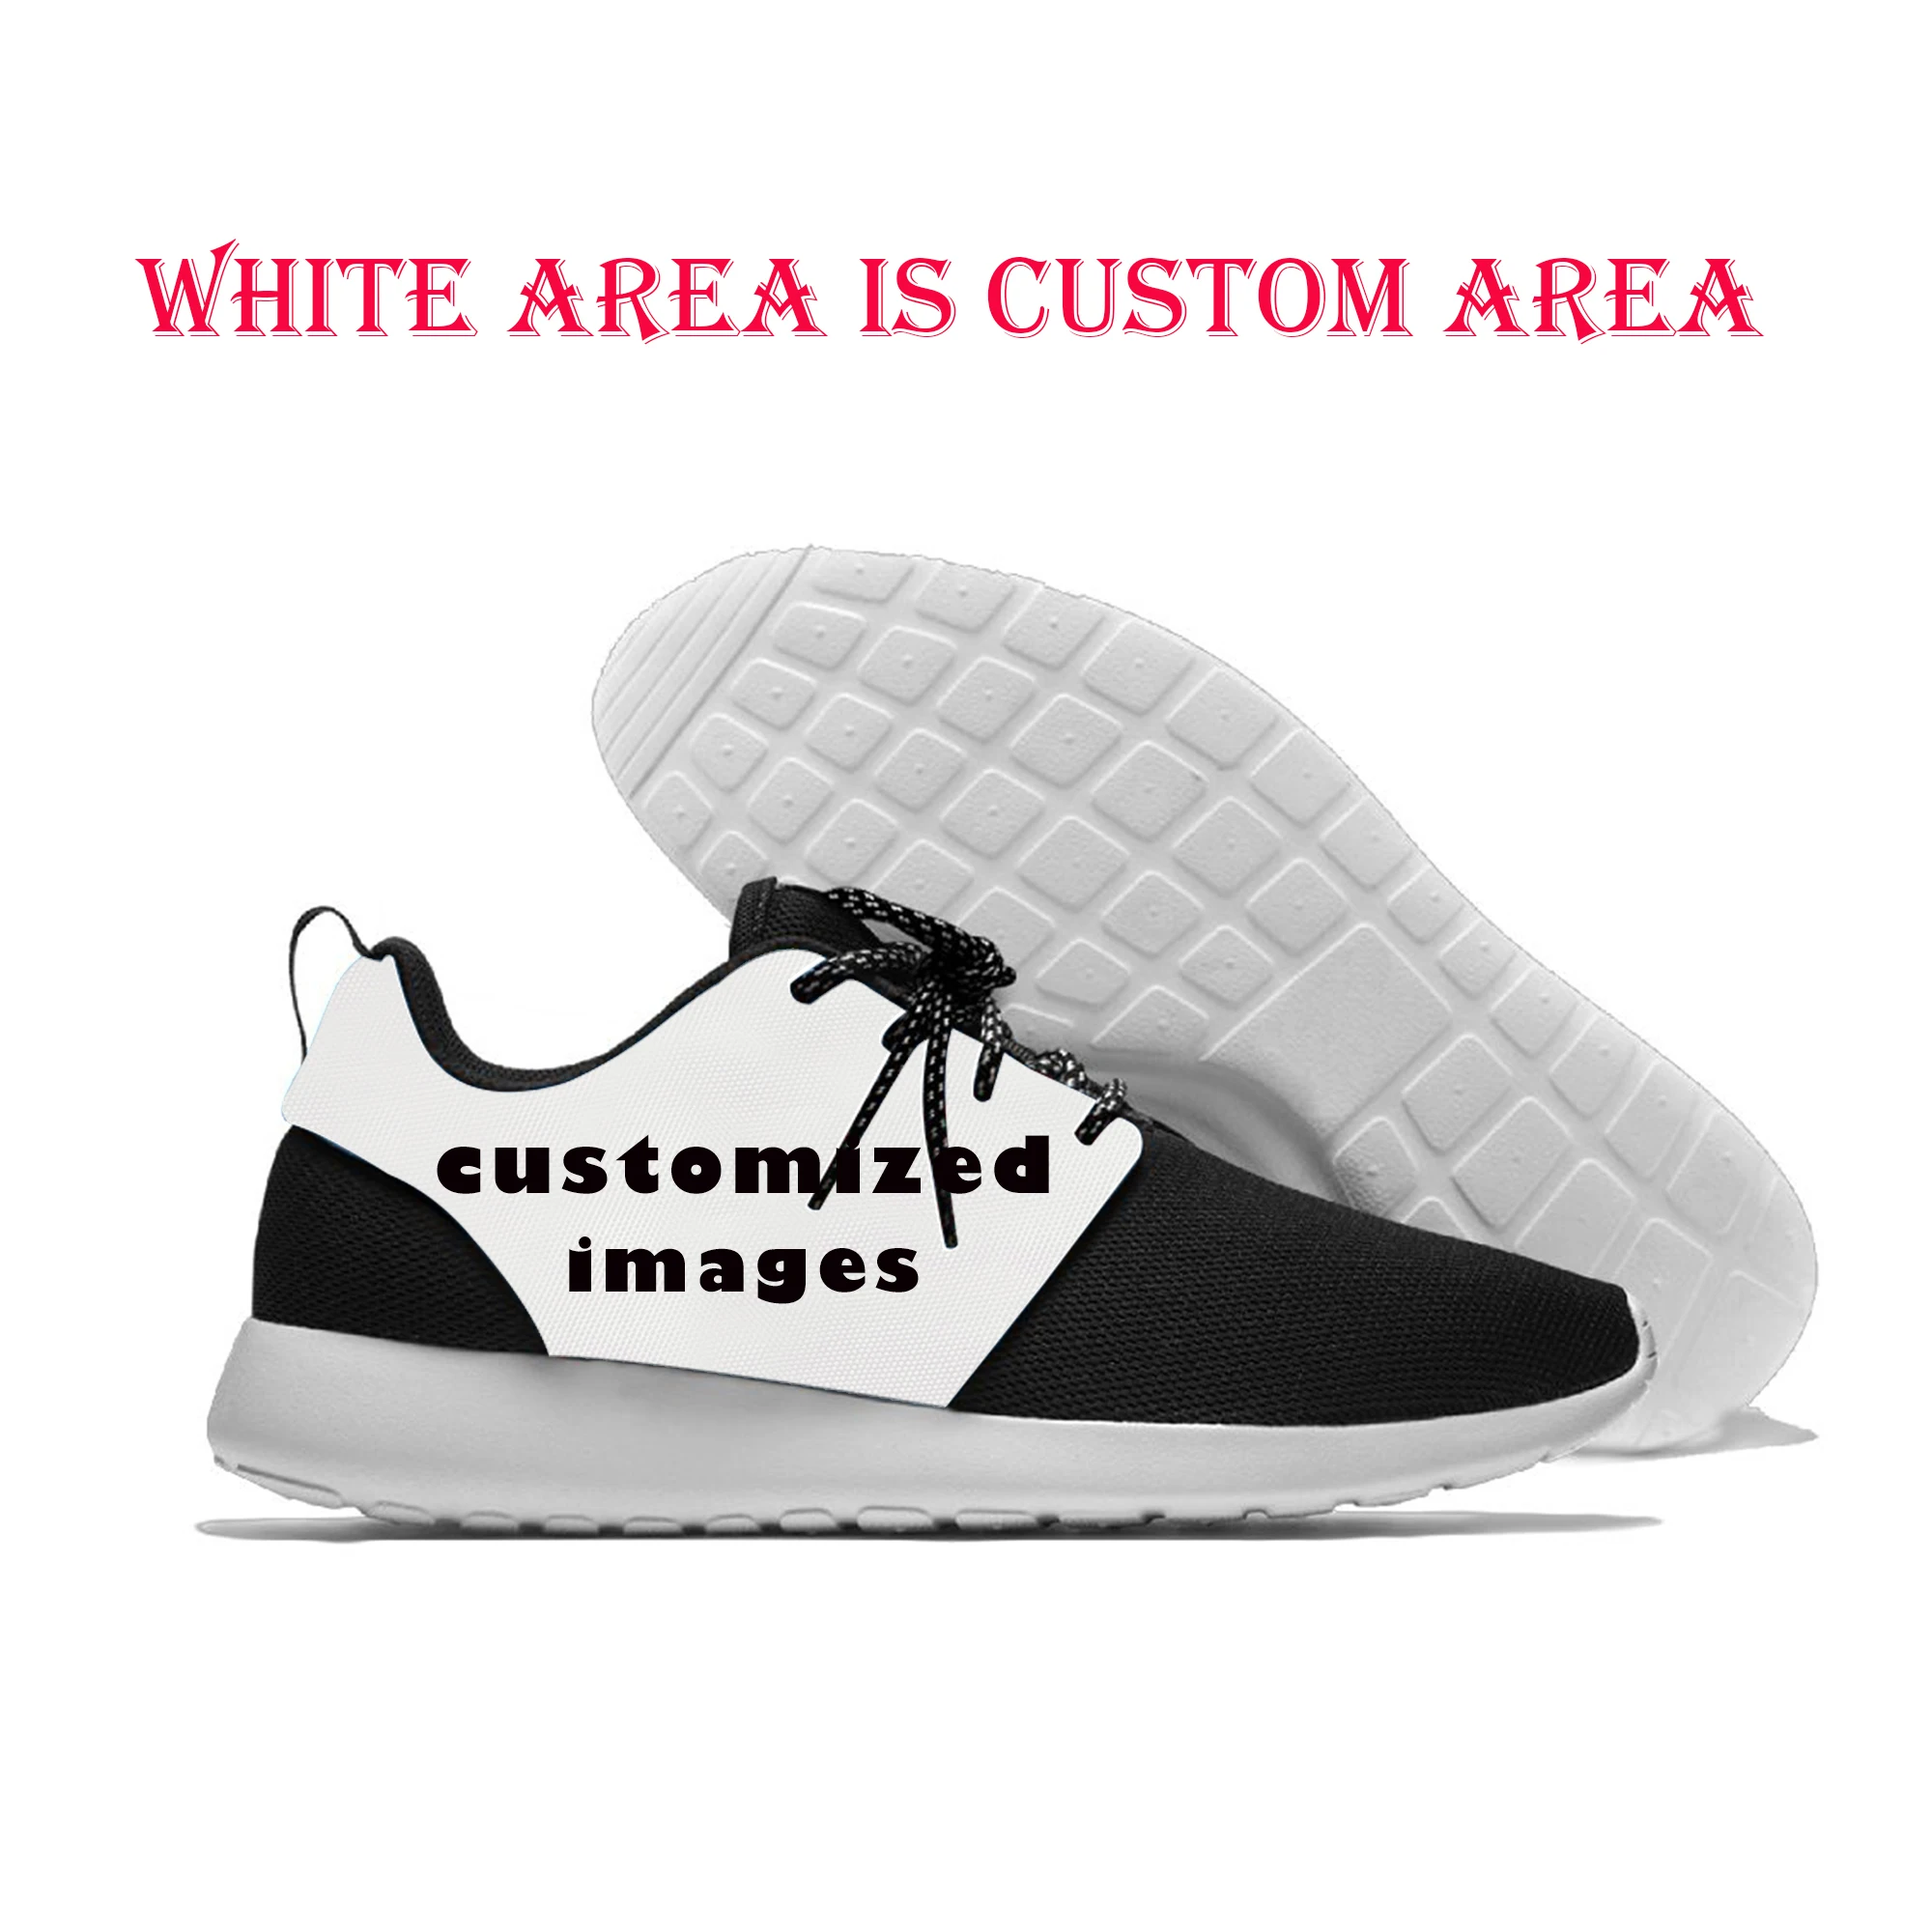 

Personality Running Shoes Design Kyle Kuzma Los Angeles Basketball Playersports And Sports Shoes Designed For Fans Sneaker